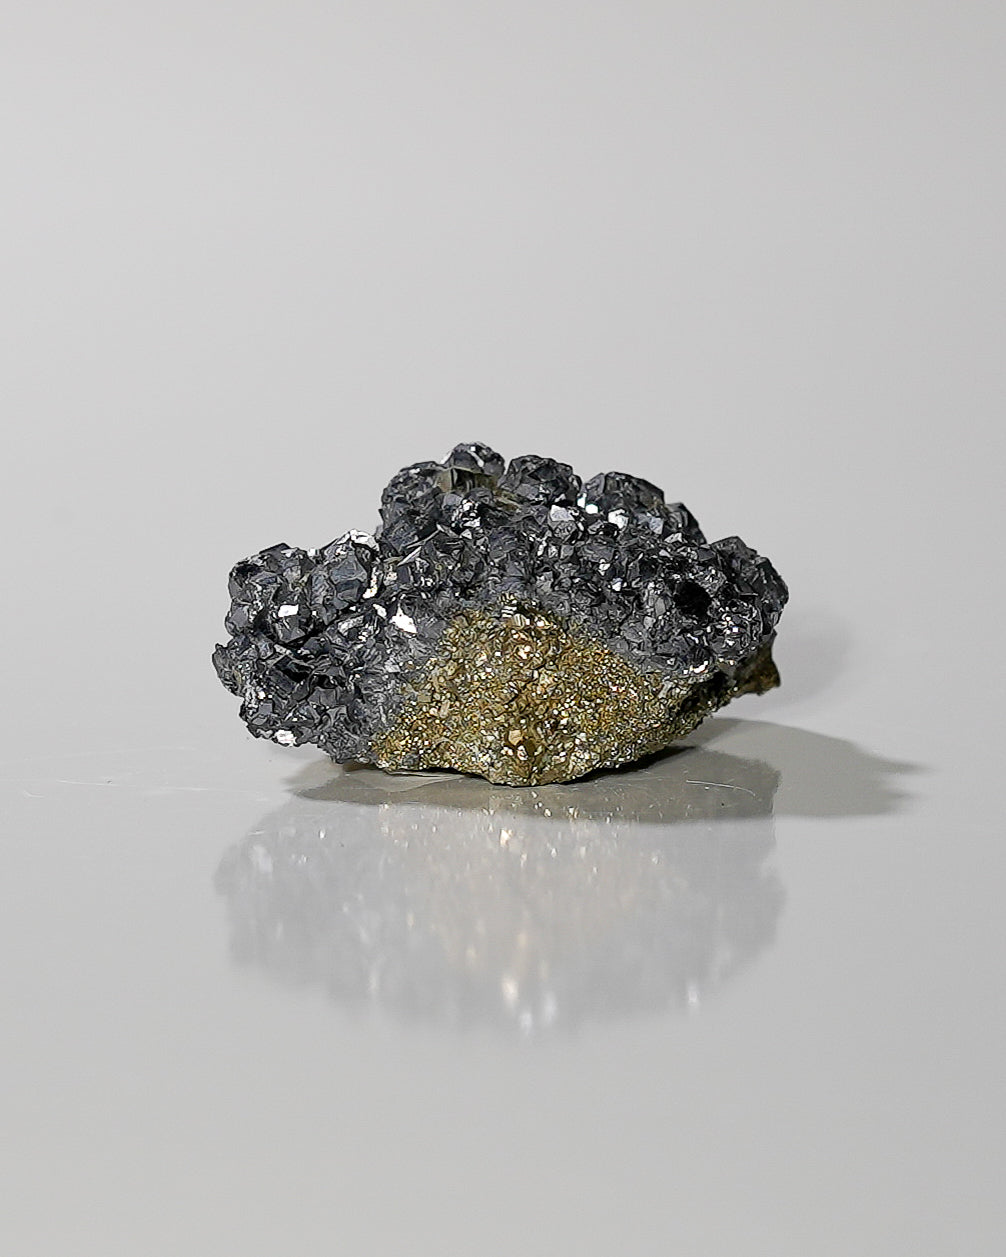 Galena with Pyrite